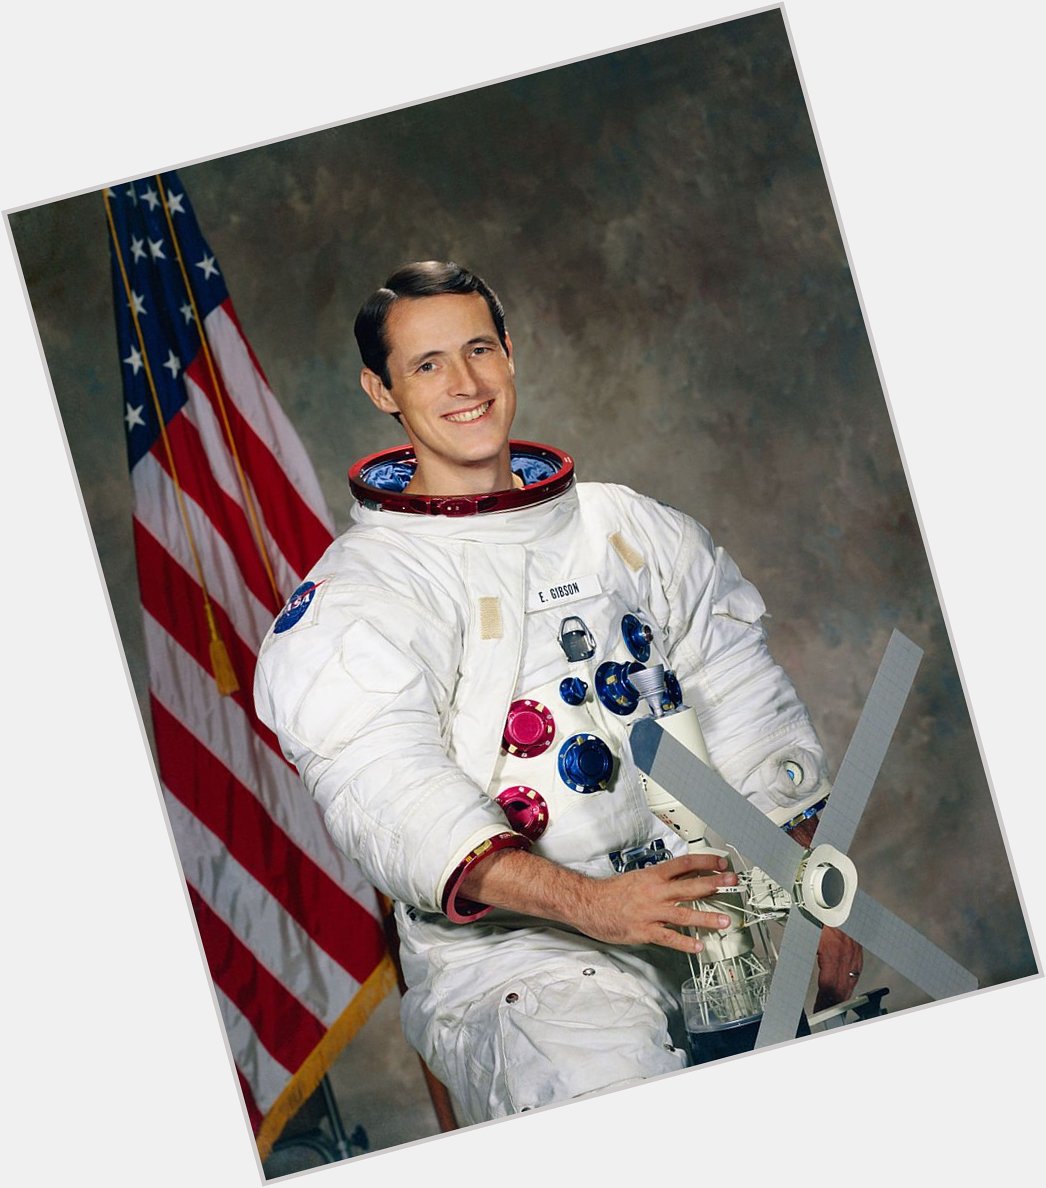 Happy birthday, Edward Gibson! A shout out to the Skylab 4 astronaut!  